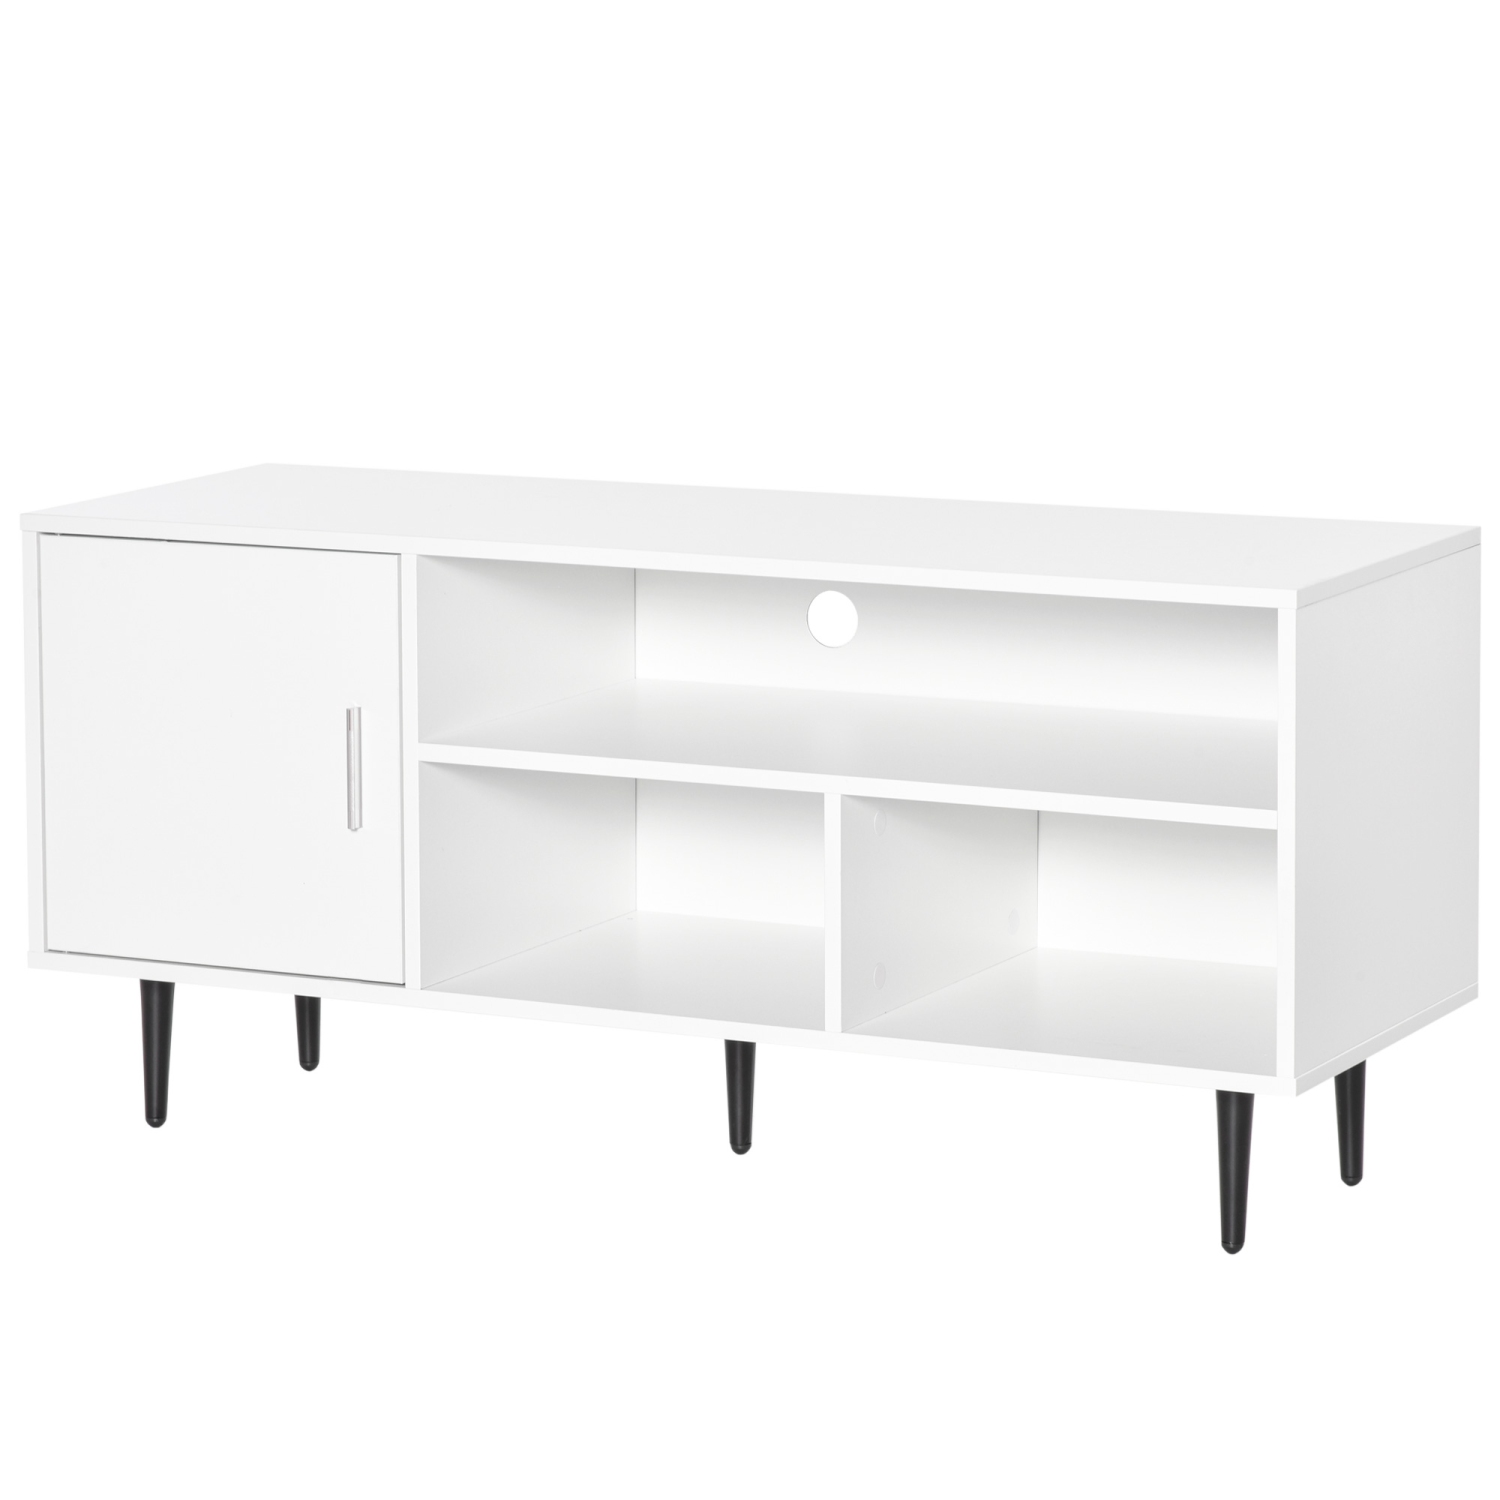 HOMCOM Modern TV Stand Cabinet for TVs up to 60 Inches with Storage Shelf, Cable Hole, Home Entertainment Unit Center, for Living Room Bedroom, White